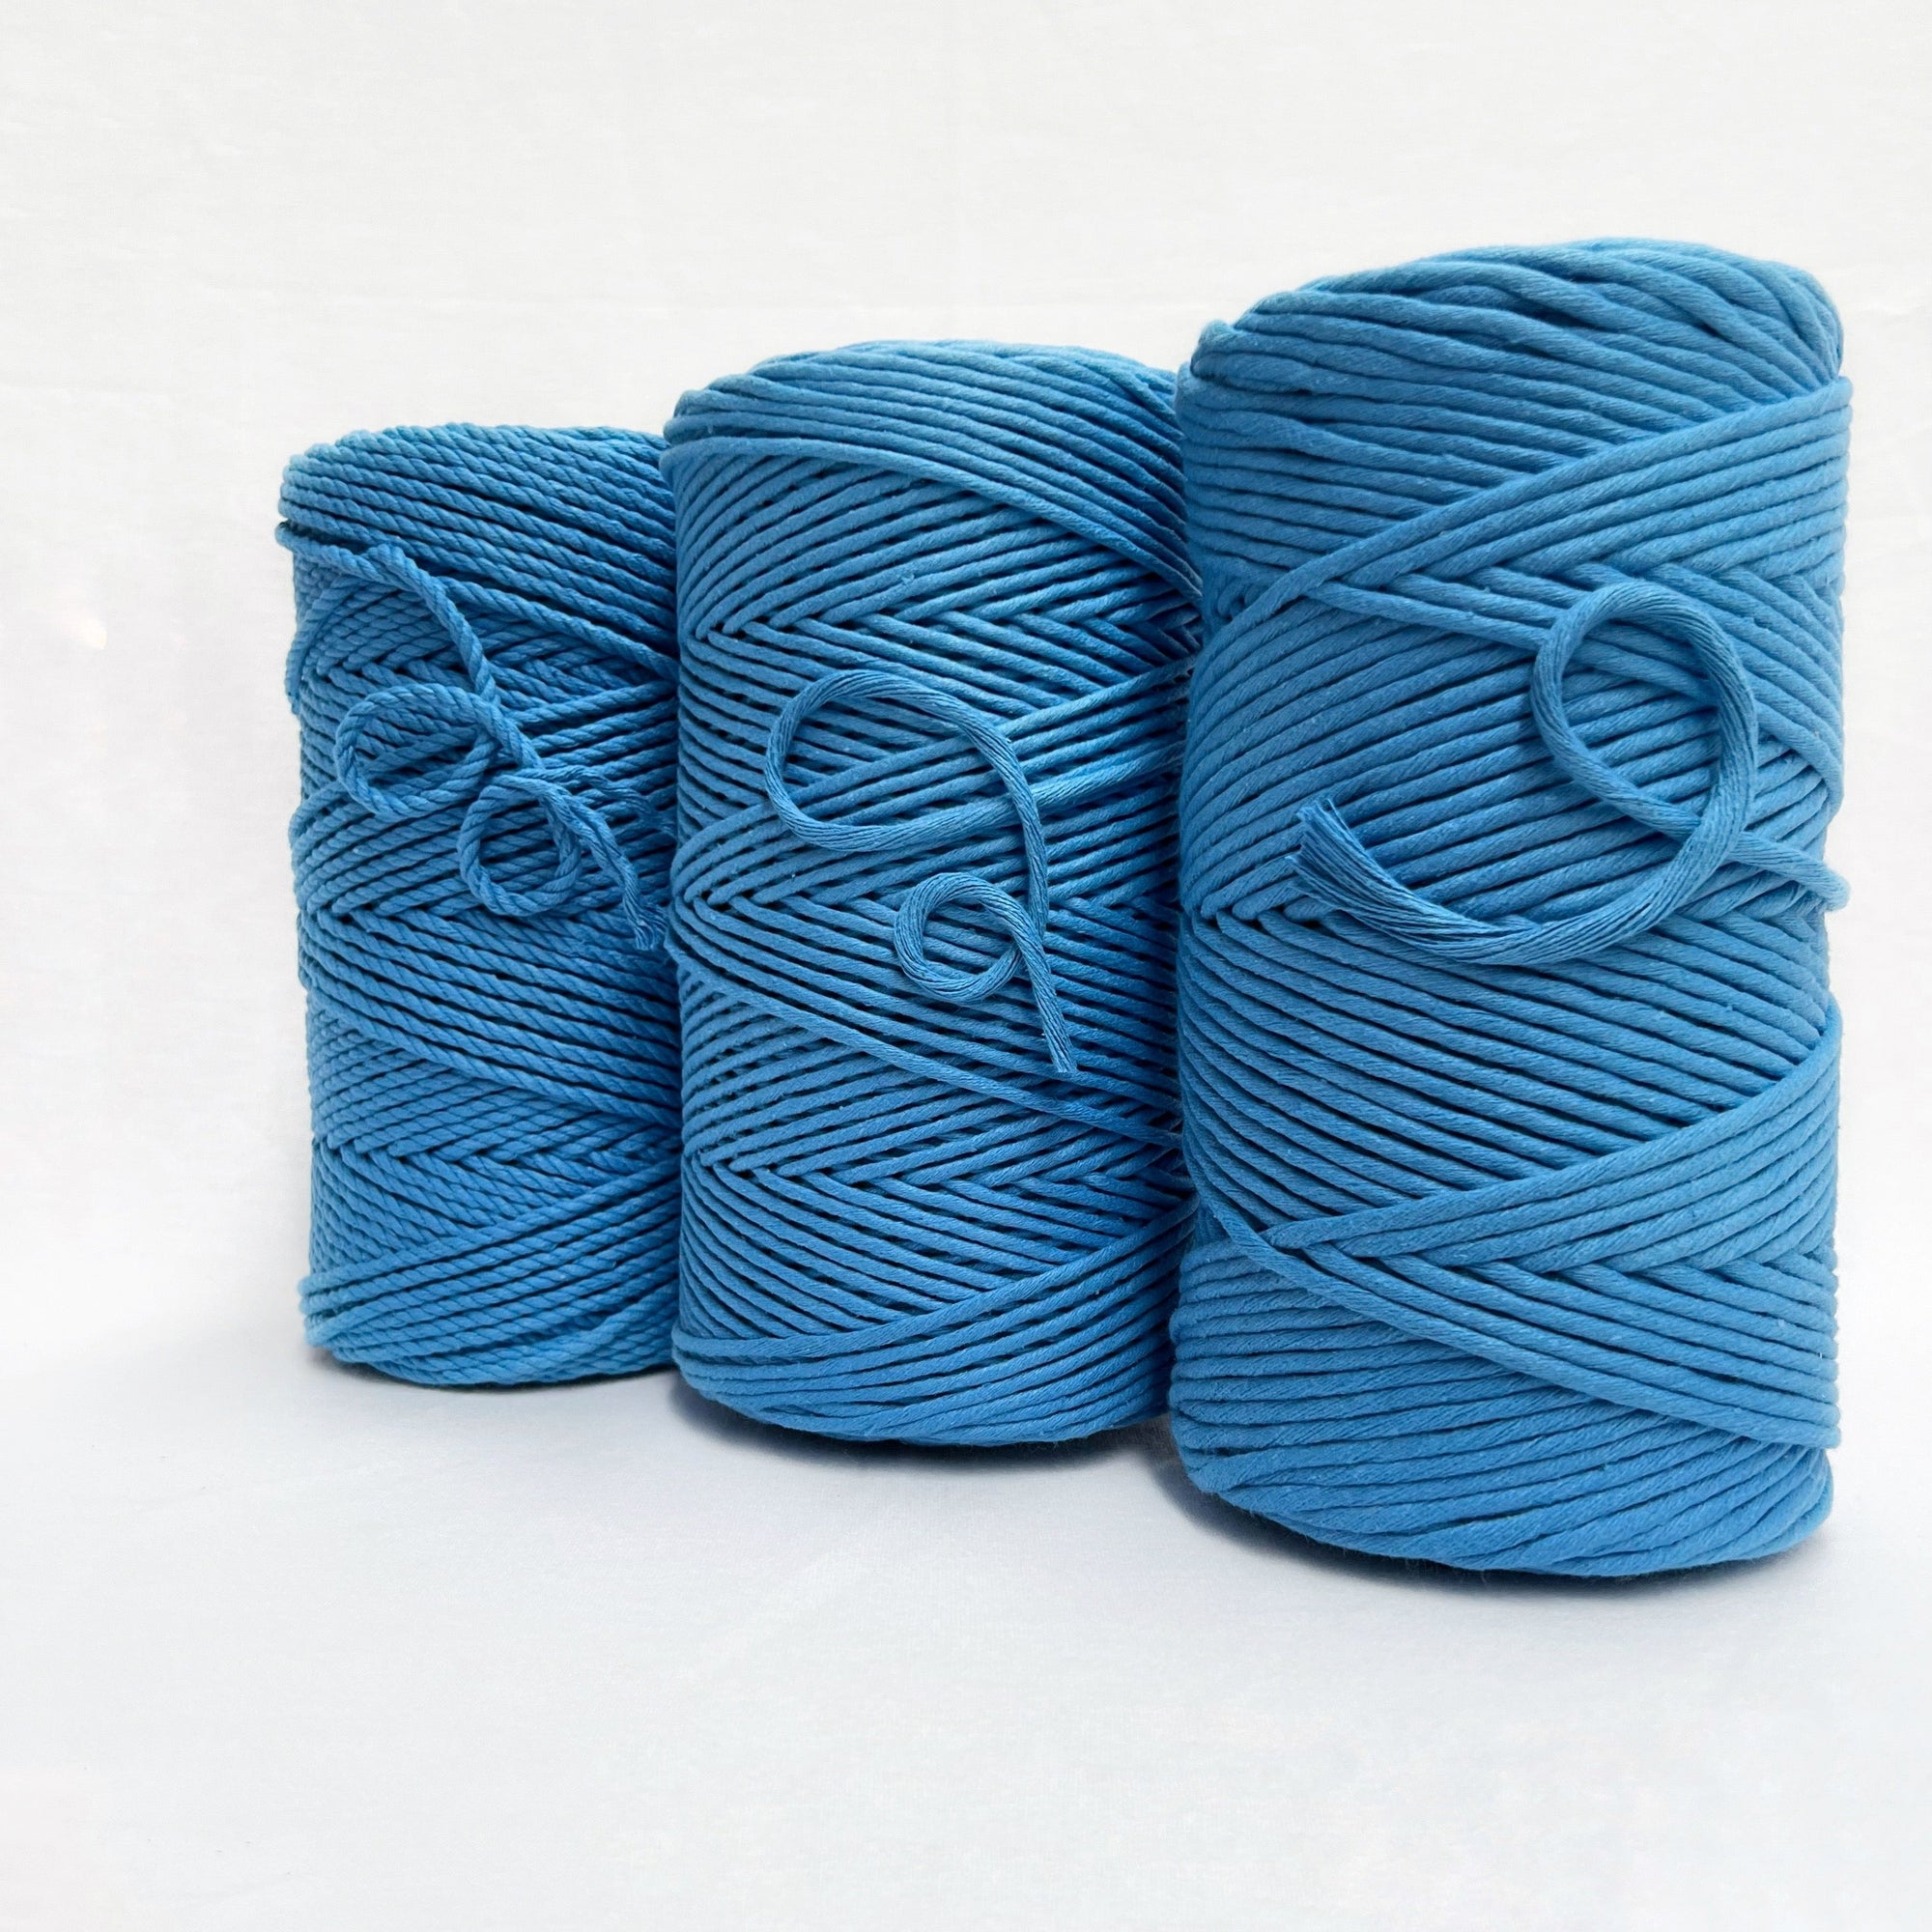 Mary Maker Studio Recycled Luxe Macrame String // Bondi Blue macrame cotton macrame rope macrame workshop macrame patterns macrame